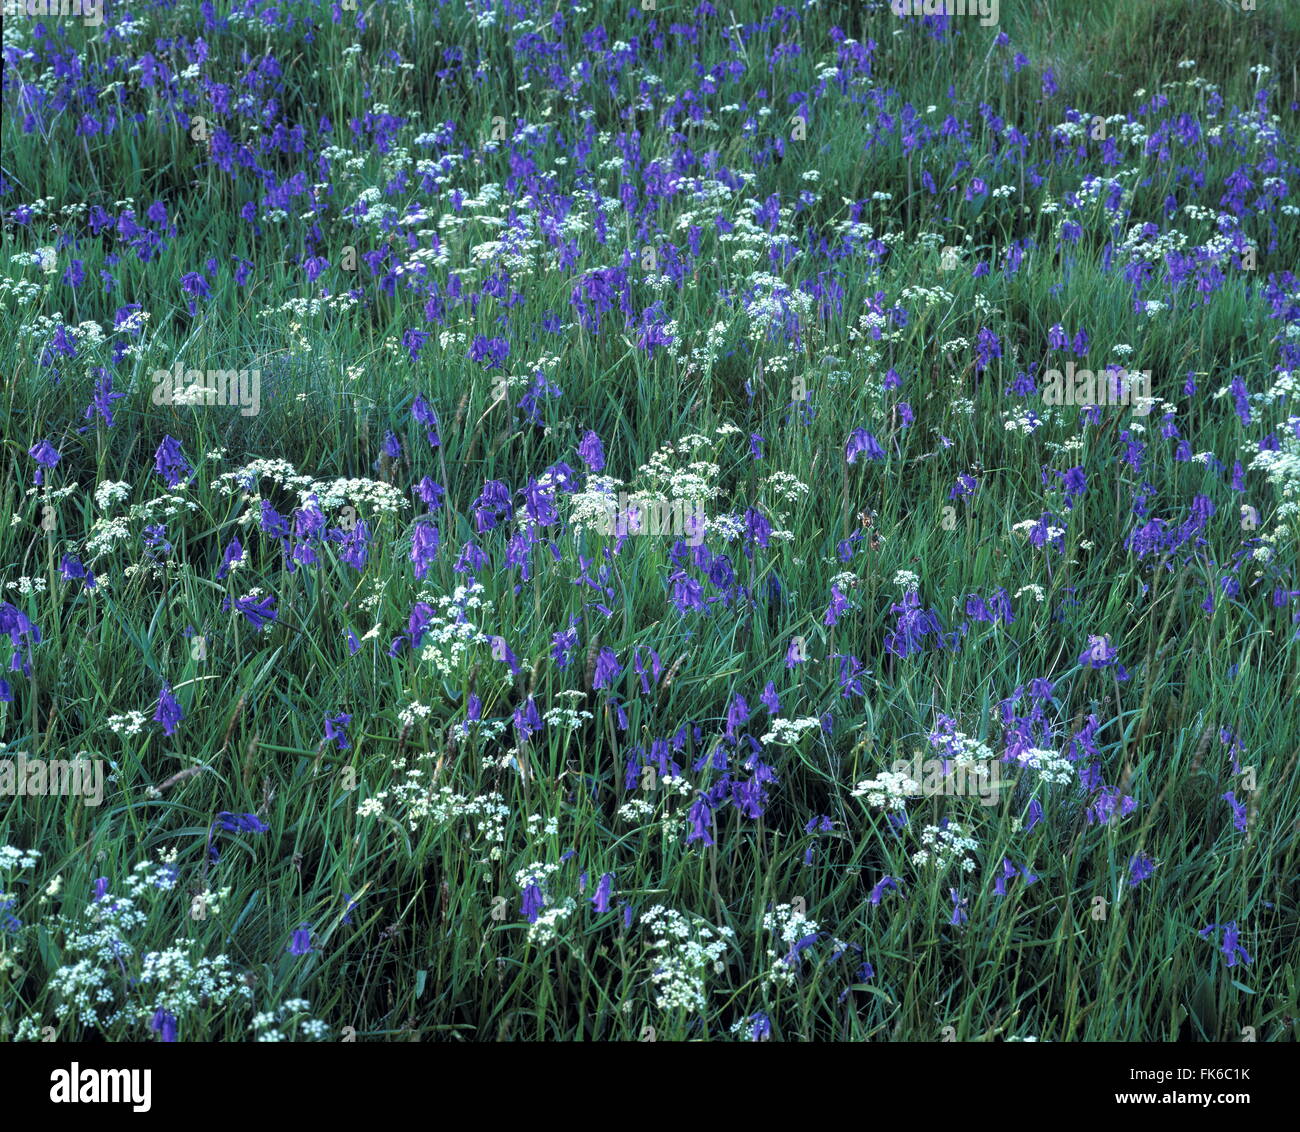 Carpet of bluebells in long grass, United Kingdom, Europe Stock Photo